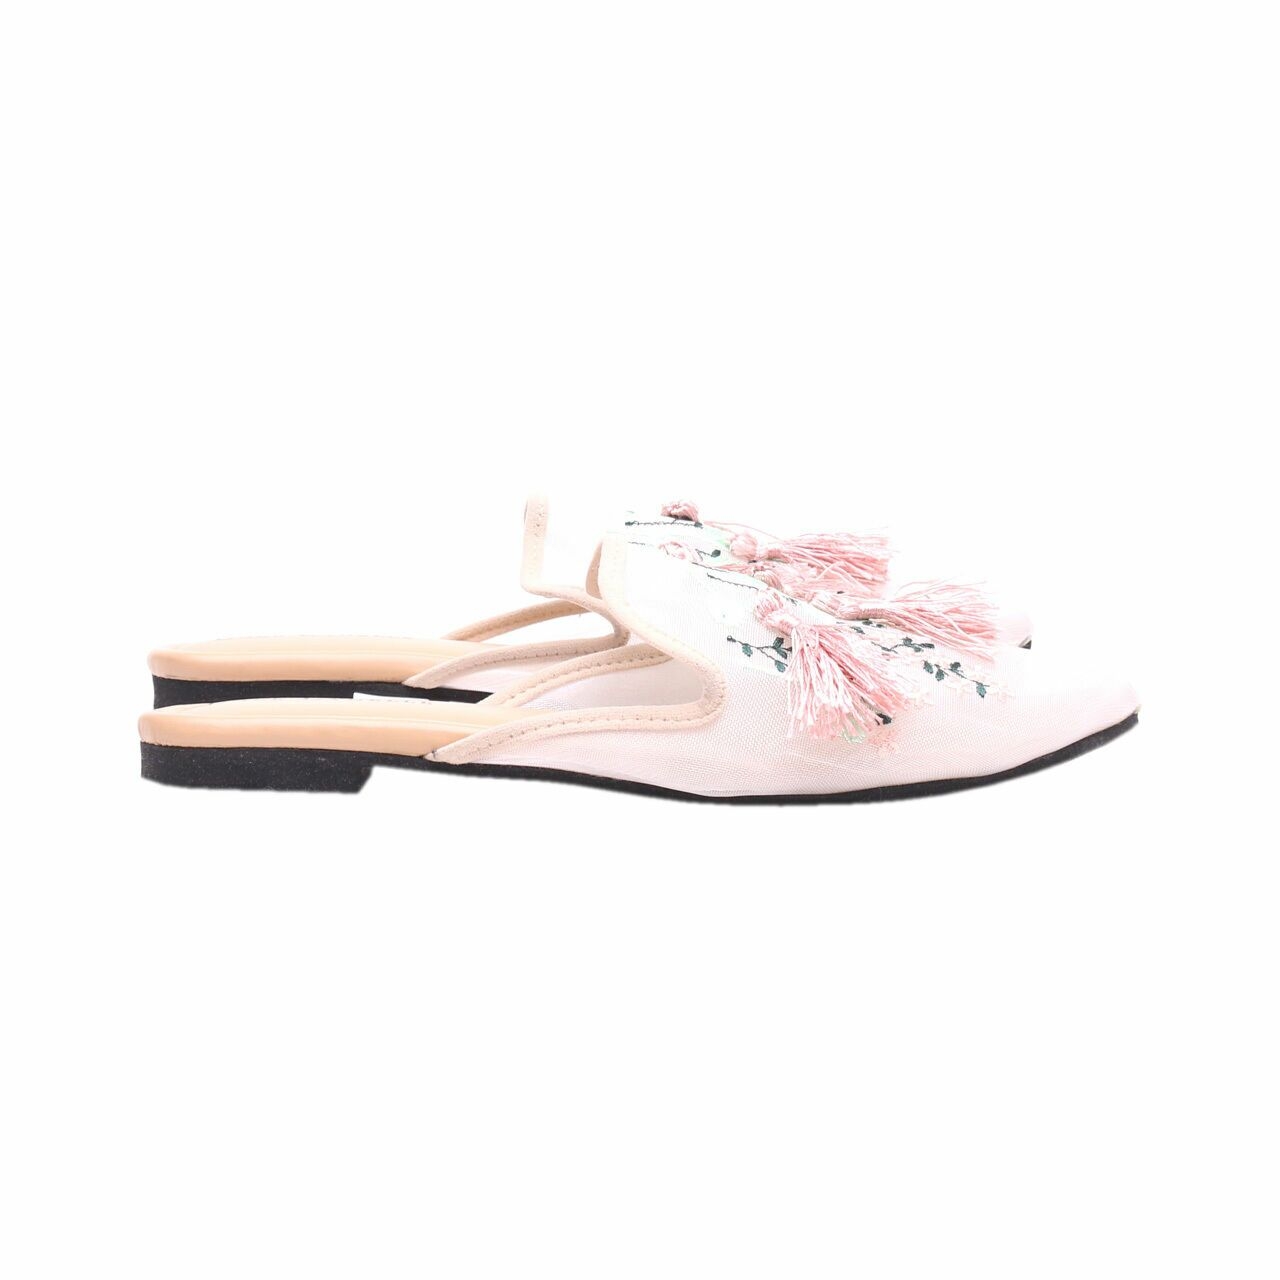 Lace Lynelle Nude Mules Sandals